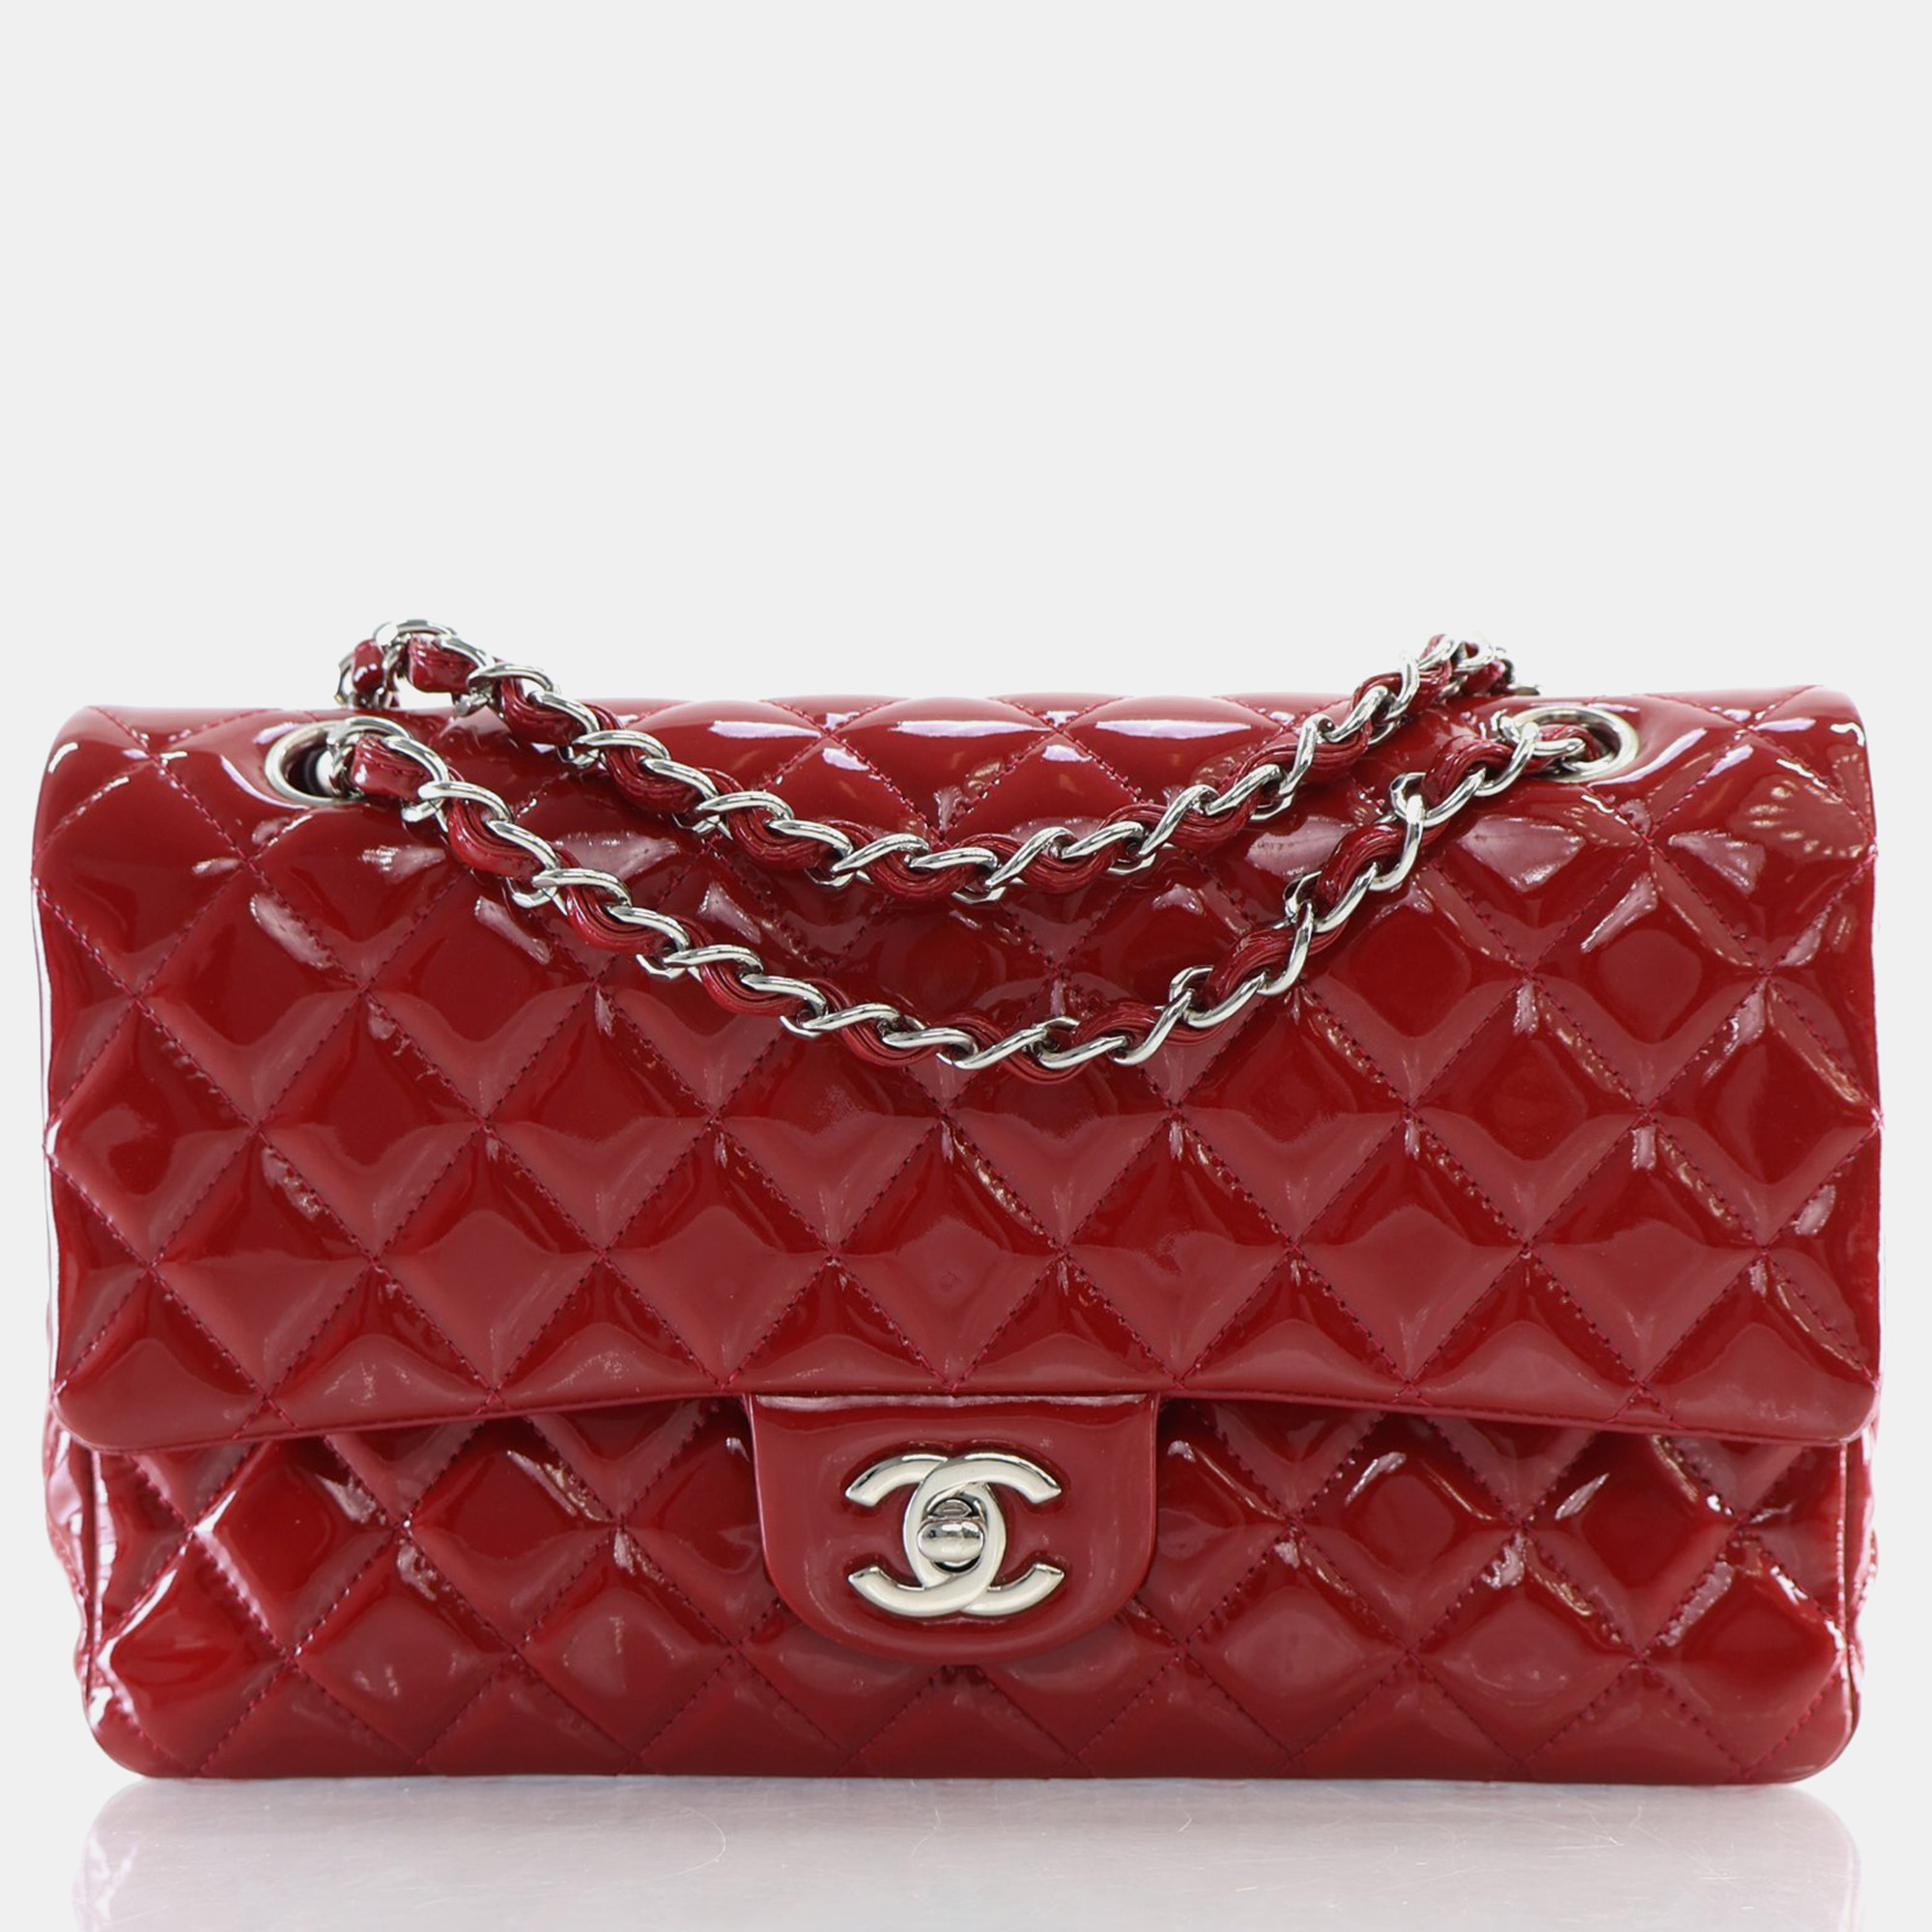 Chanel red patent leather medium classic double flap shoulder bag